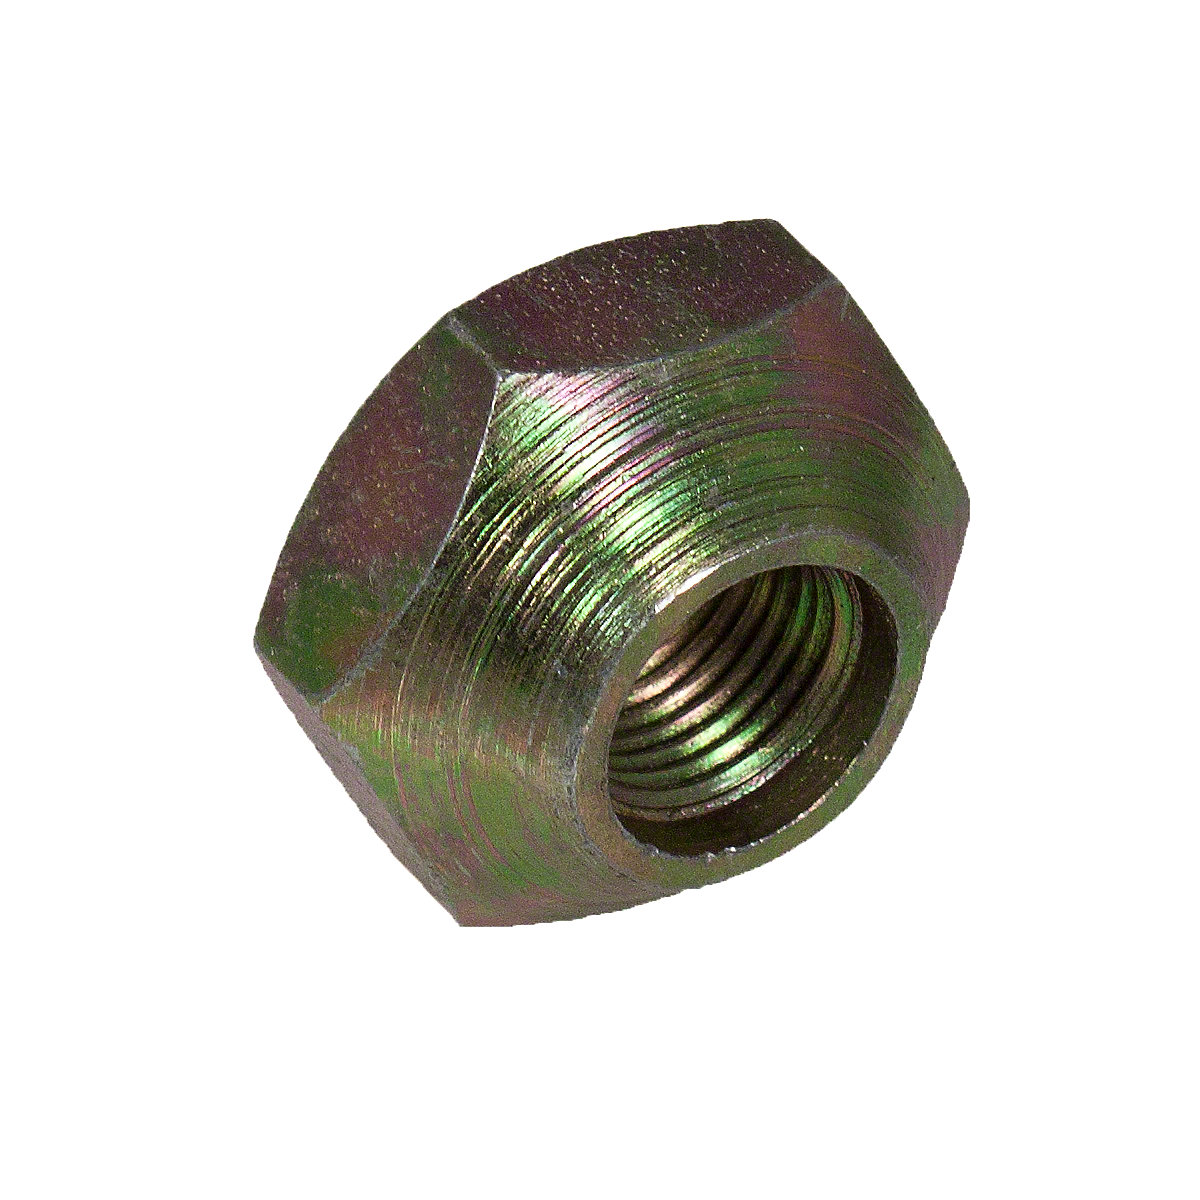 Front Lug Nut For Massey Ferguson: 40, TO20, TO30, TO35, 50, 1100, 1130, 135, 148, 150, 165, 175, 180, 250, 253, 255, 265, 265s, 270, 275, 281, 282, 283, 290, 340, 342, 35, 350, 352, 355, 360, 362, 365, 372, 375, 383, 390, 390t, 393, 396, 398, 399, 4225, 